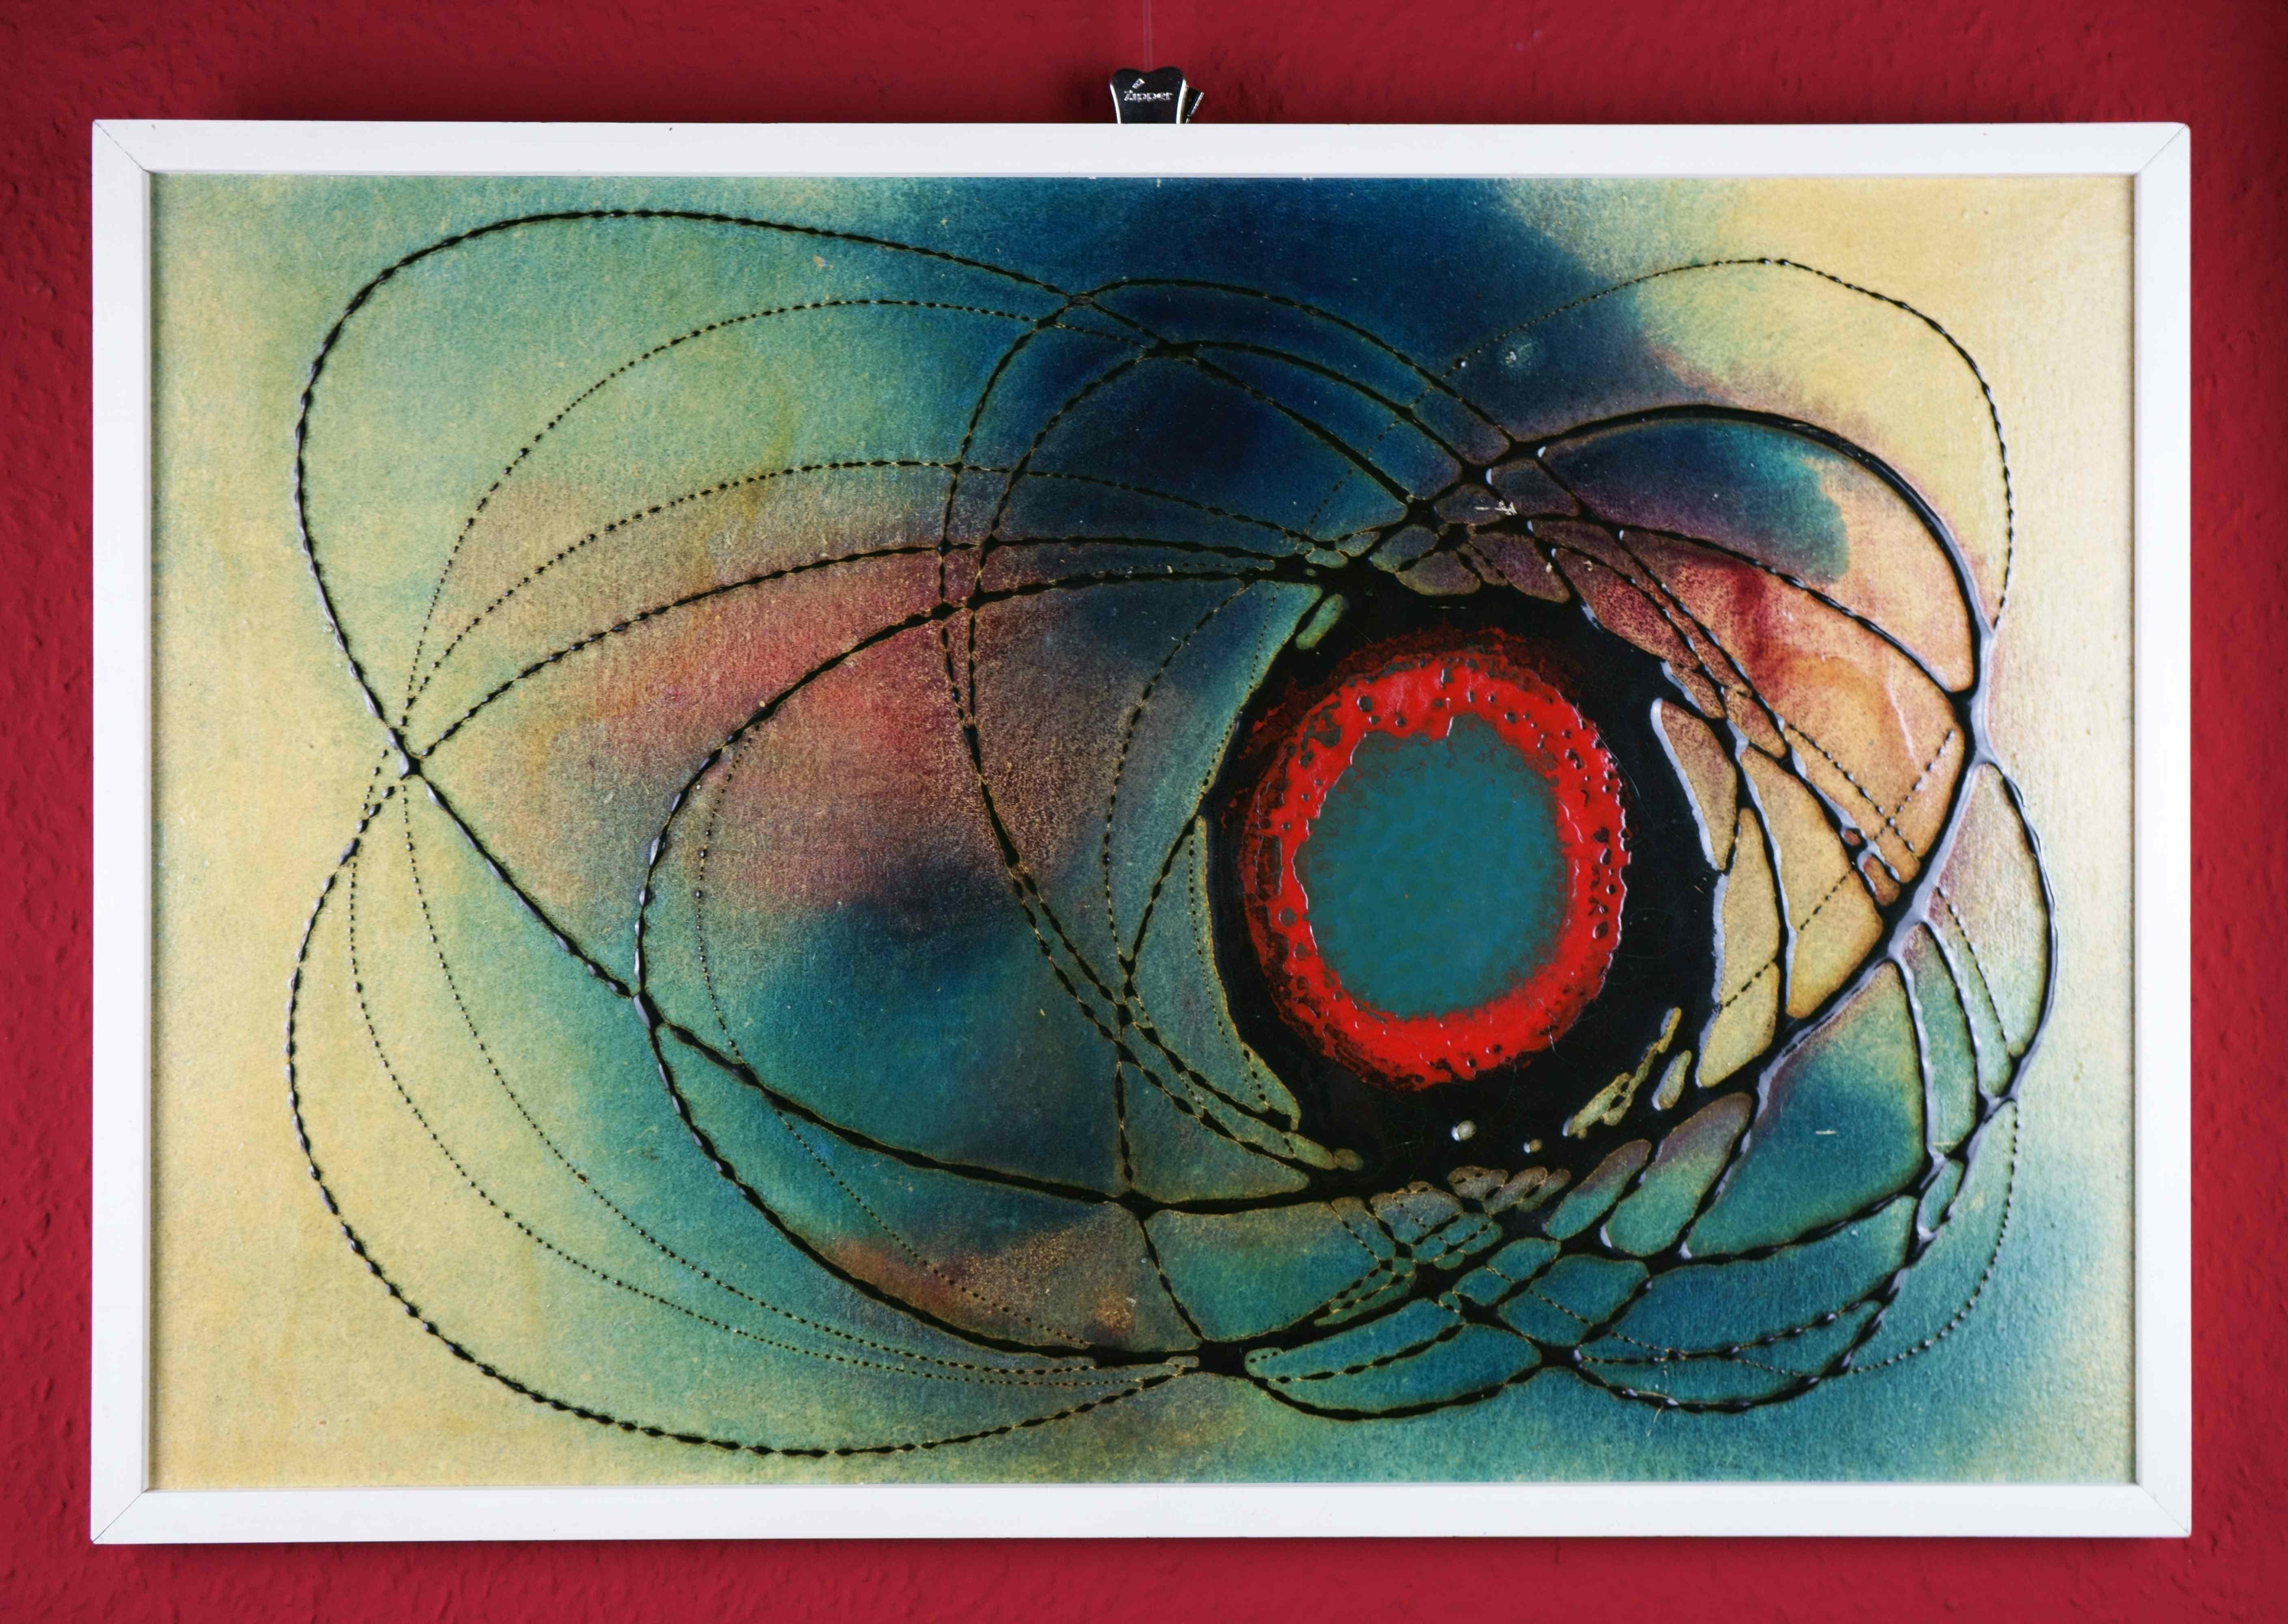 Klaus Oldenburg (*1942 Berlin), Eccentric discharges of a blue-red core, around 1975. paint and cast resin on chipboard, 39 x 59 cm (inside dimension), 42 x 62 (frame), signed on the reverse 